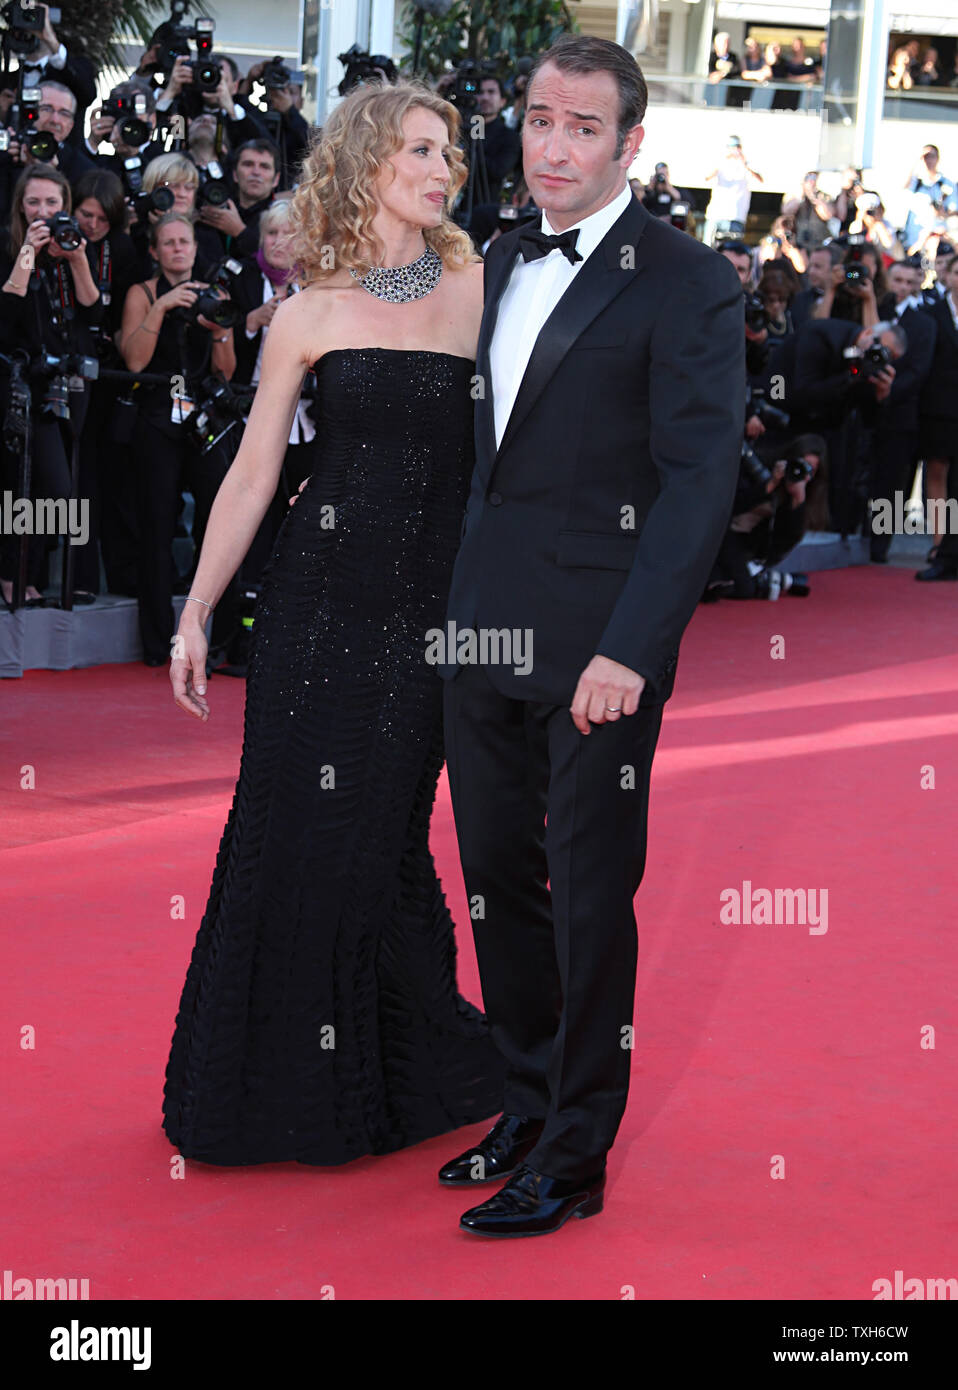 Jean Dujardin (R) and his wife Alexandra Lamy arrive on the red carpet  before the screening of the film "The Artist" during the 64th annual Cannes  International Film Festival in Cannes, France